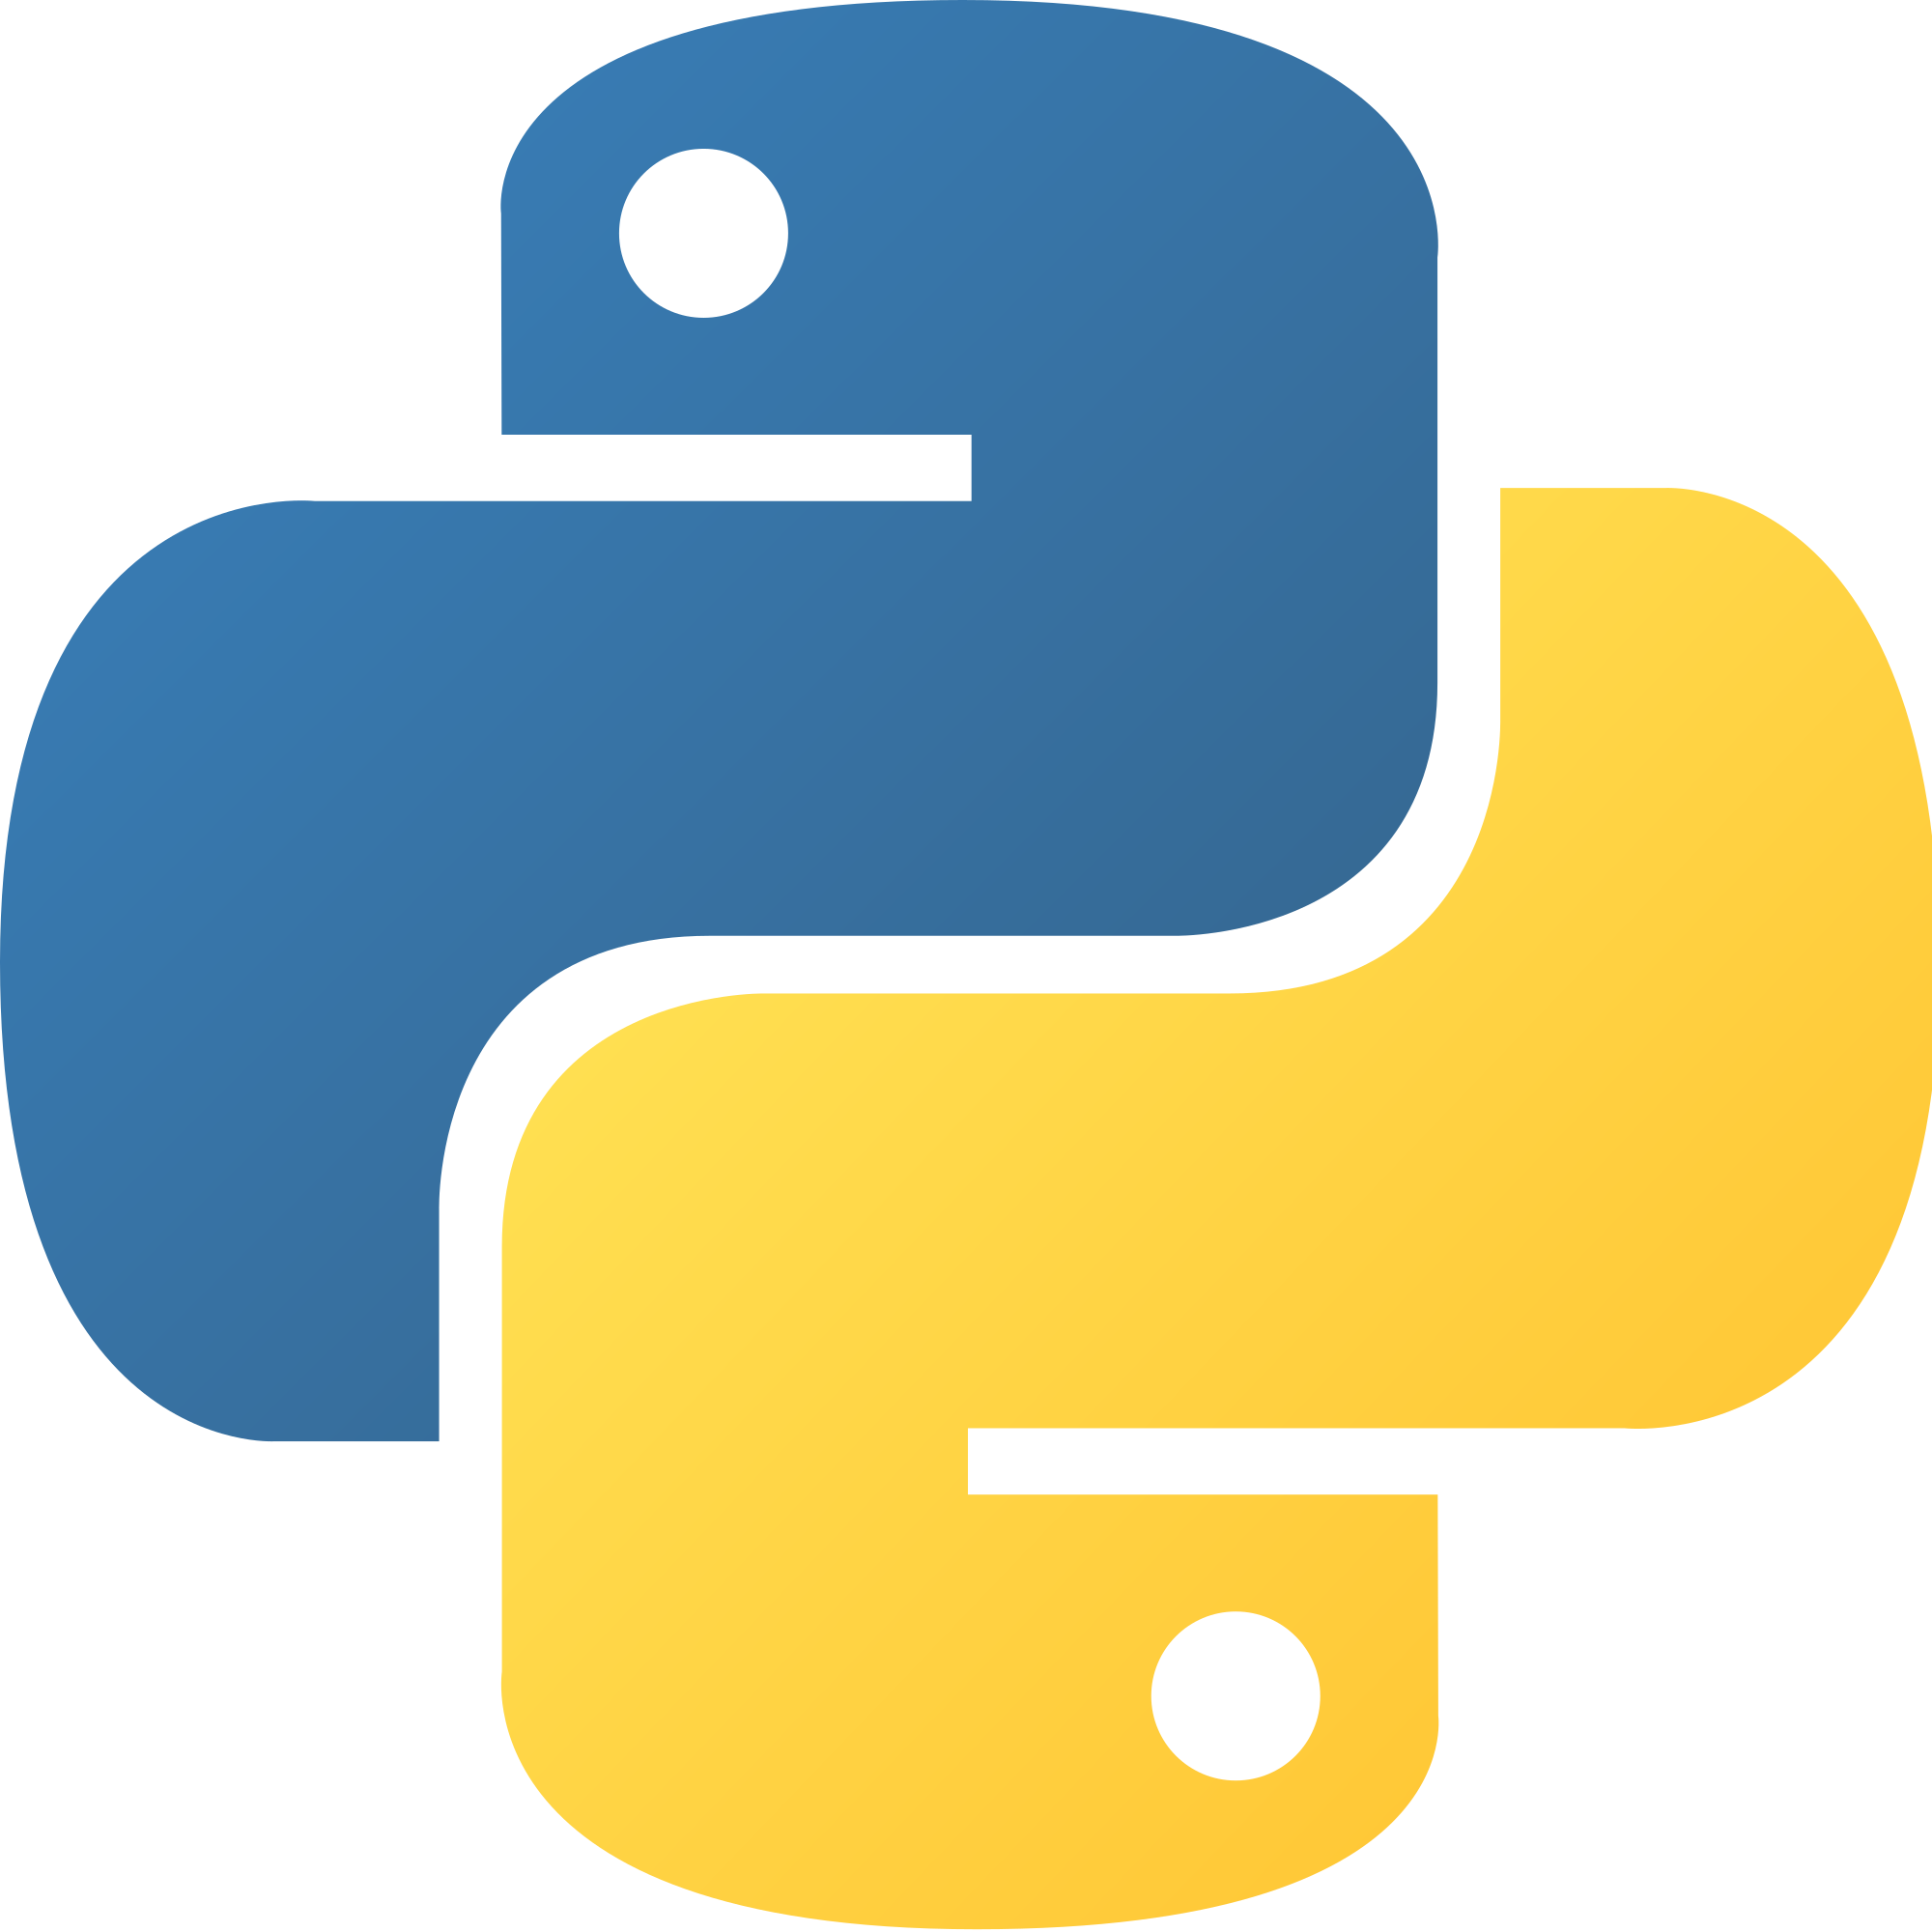 Python is one of the easiest languages to use and work with. Python can create a framework for basically any website need.